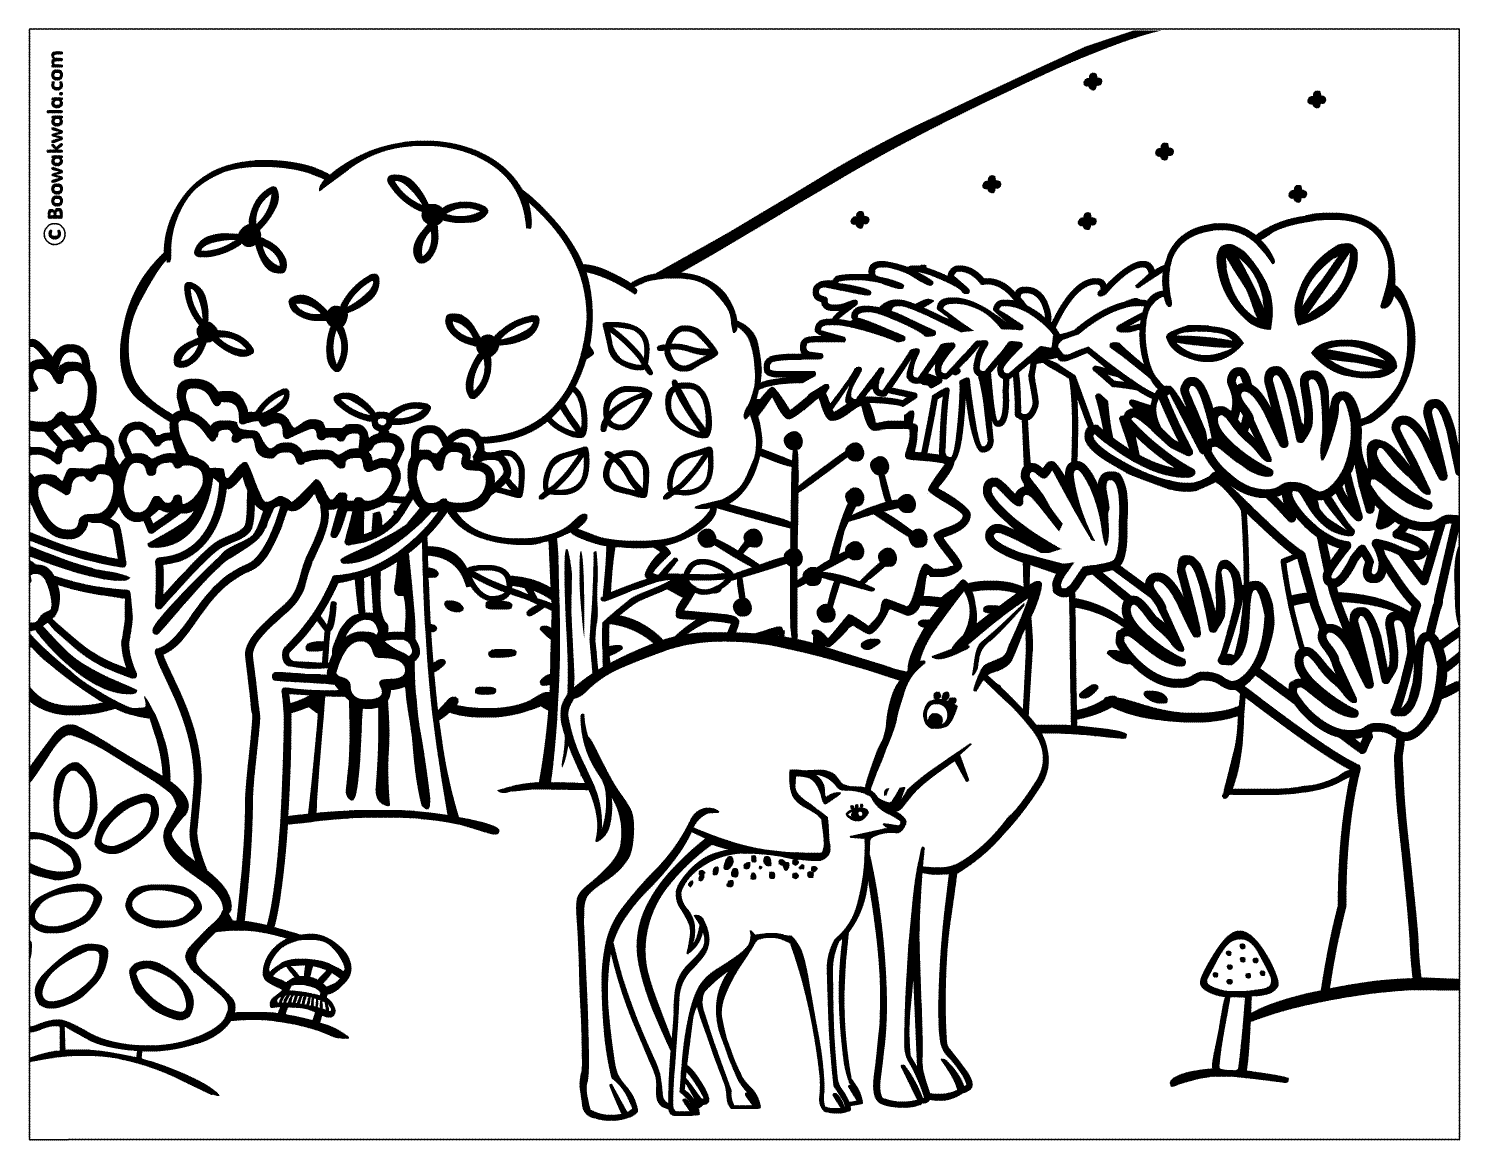 printable-forest-animal-coloring-pages-best-coloring-pages-for-kids